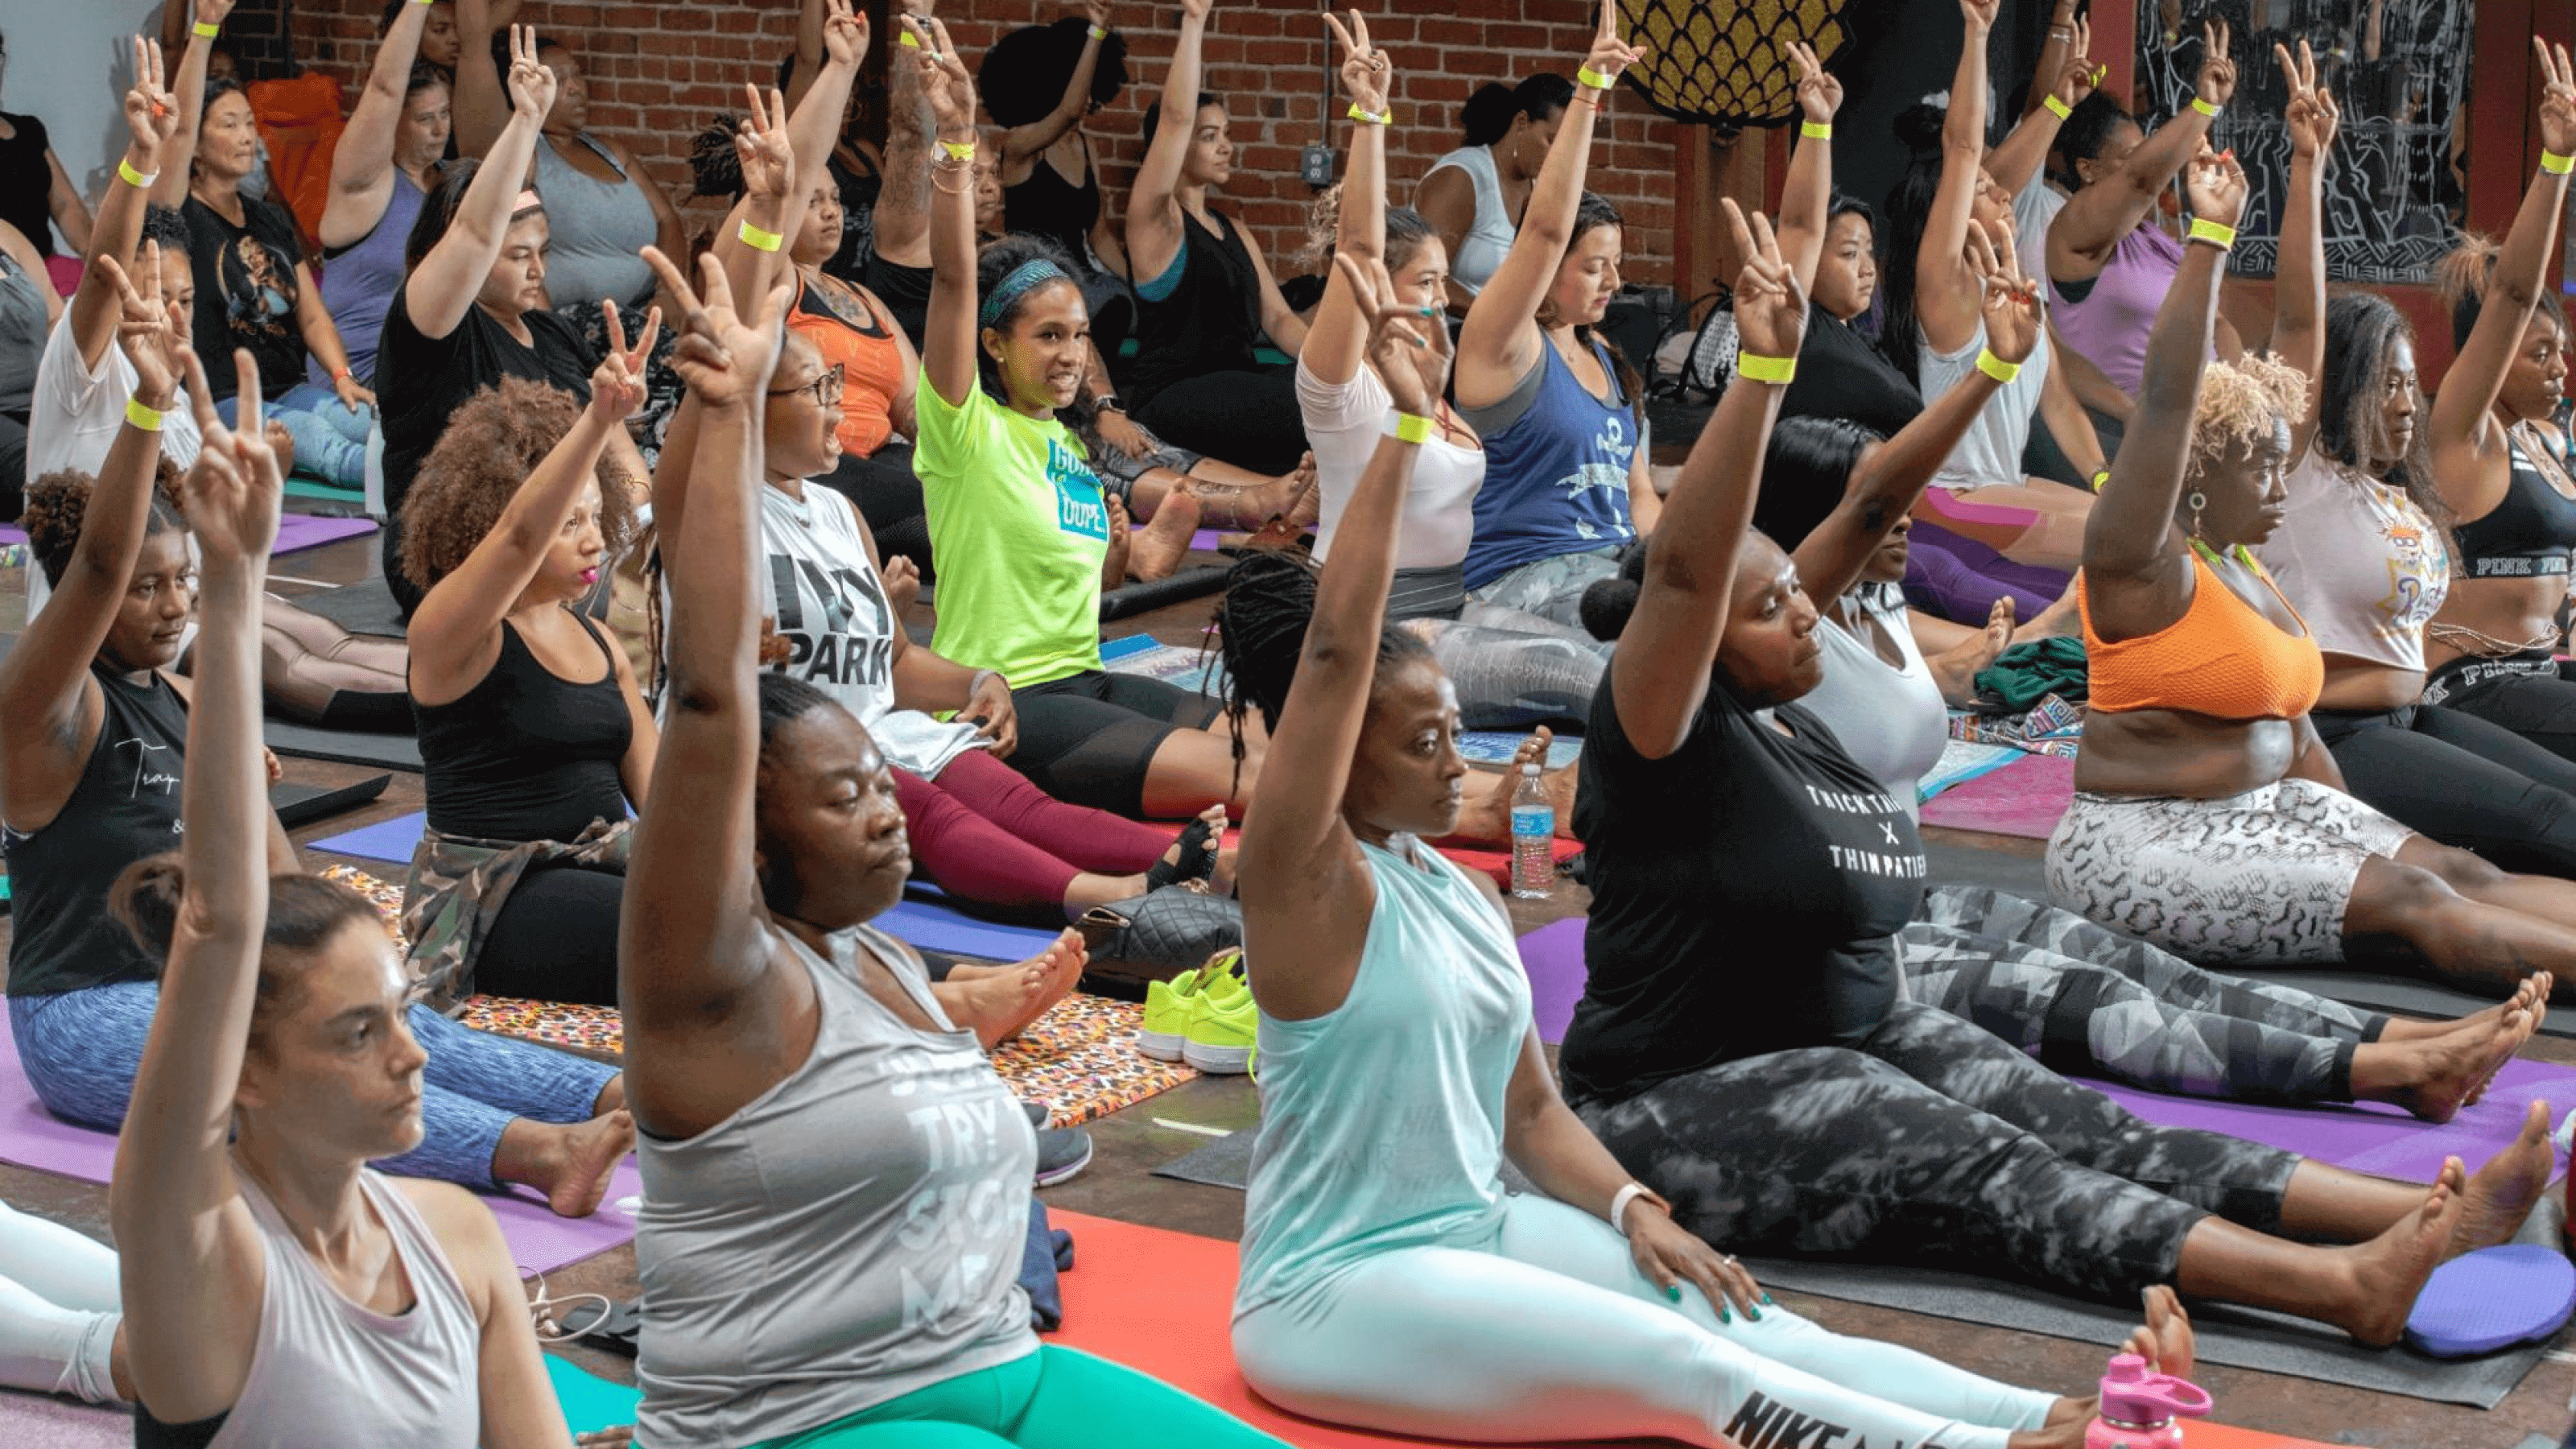 People raising their hands at a yoga event